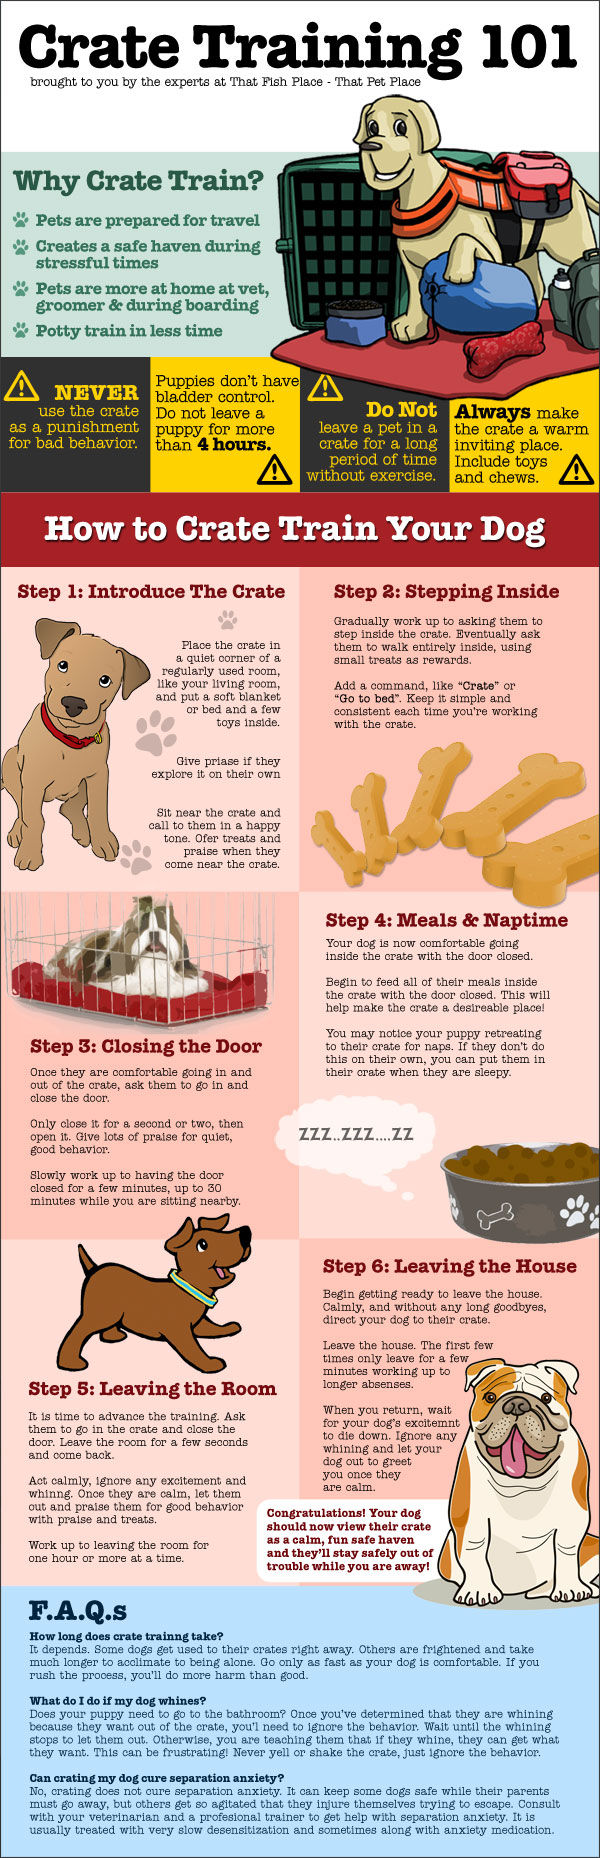 Crate Training 101 Infographic